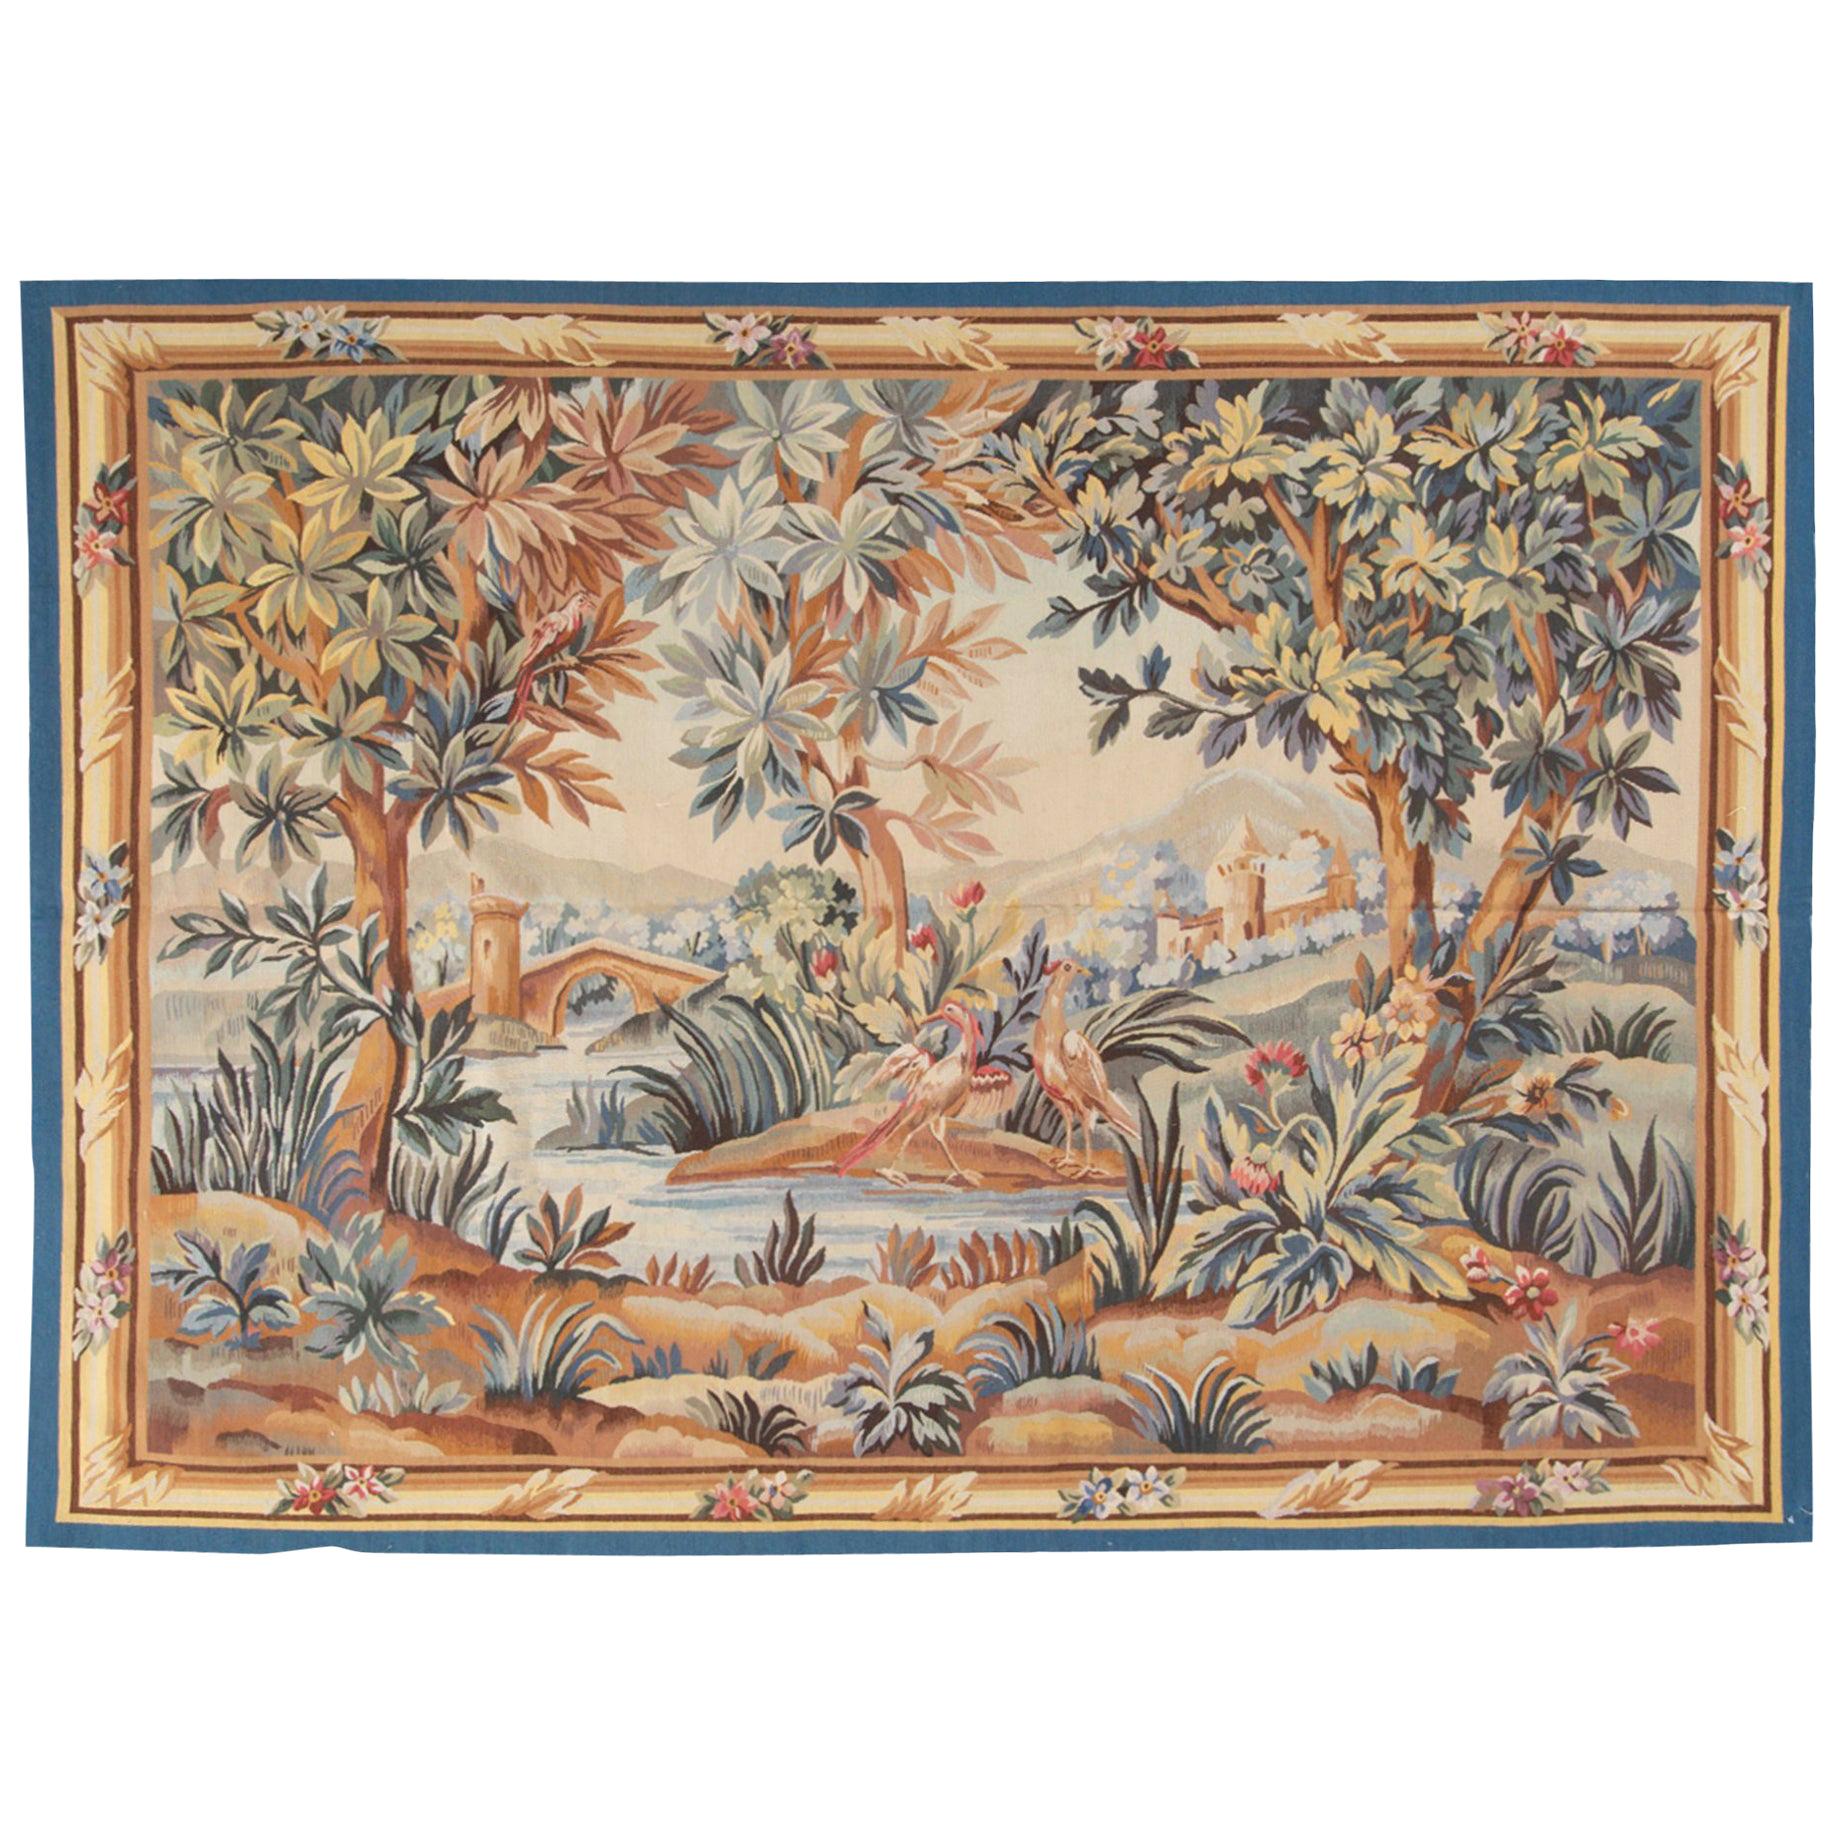 Elegant 18th Century Aubusson Style Tapestry 5'11 x 7'3 For Sale